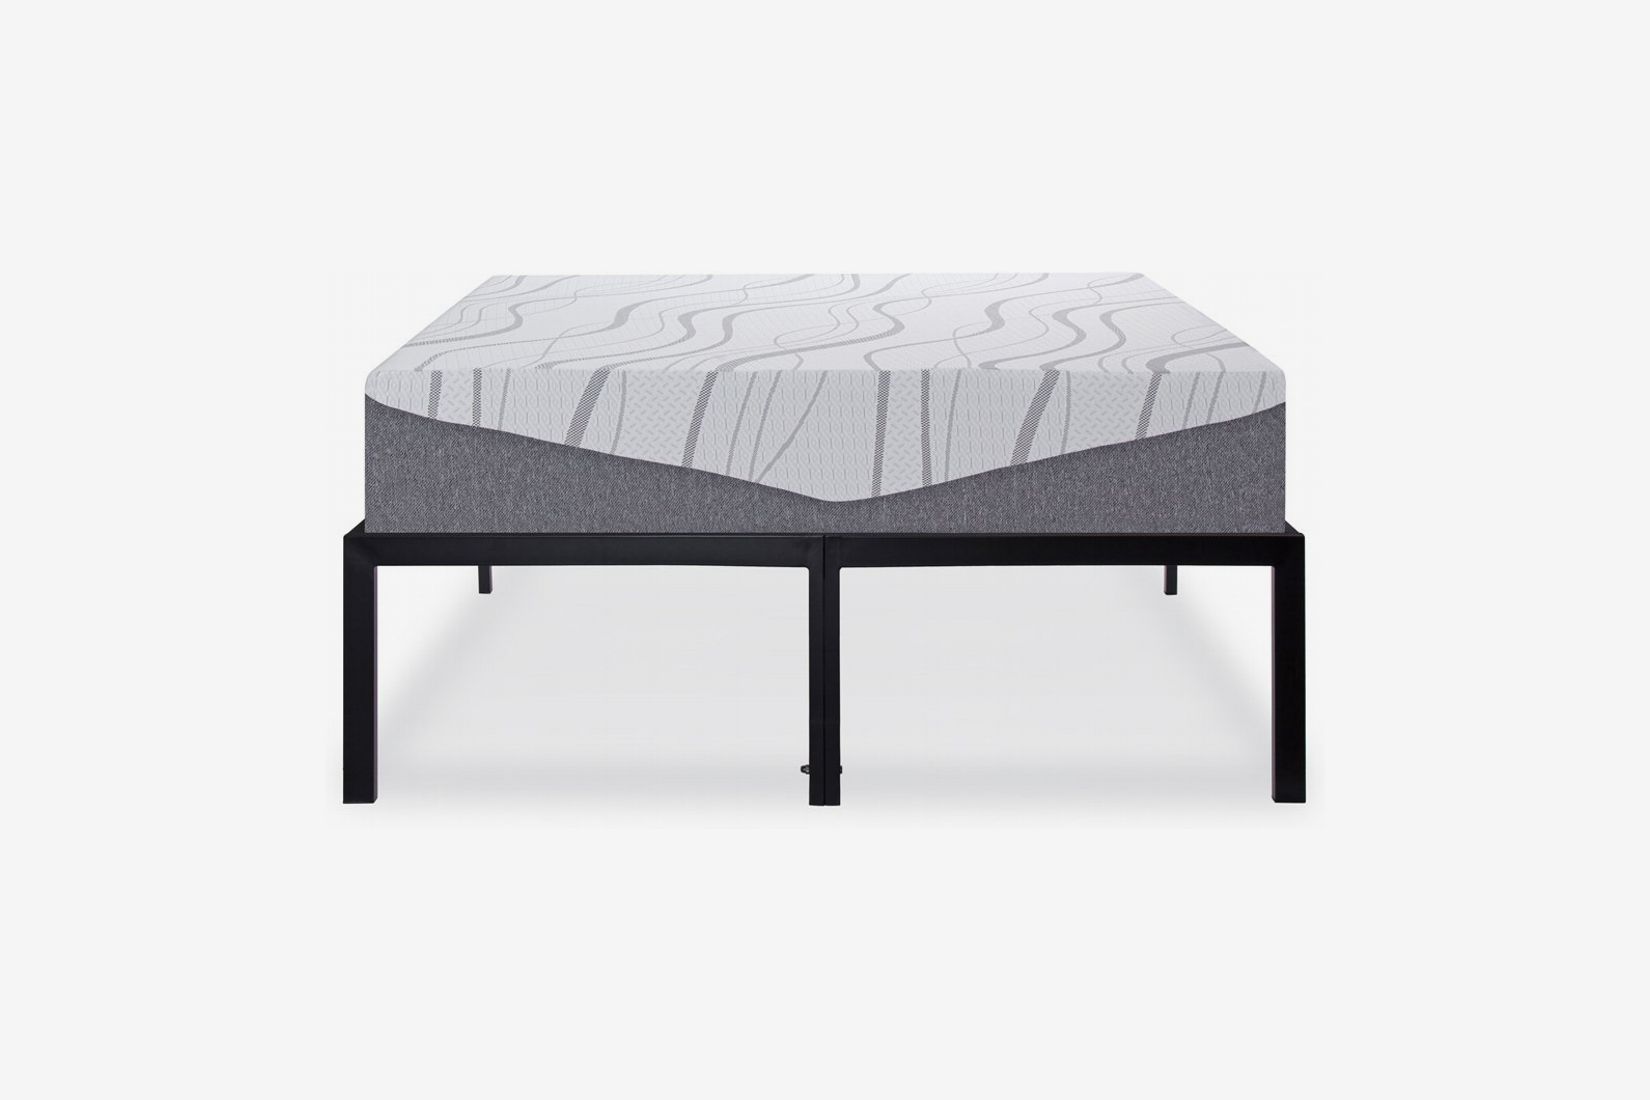 19 Best Metal Bed Frames 2020 The, Bed Frame For Heavy Mattress